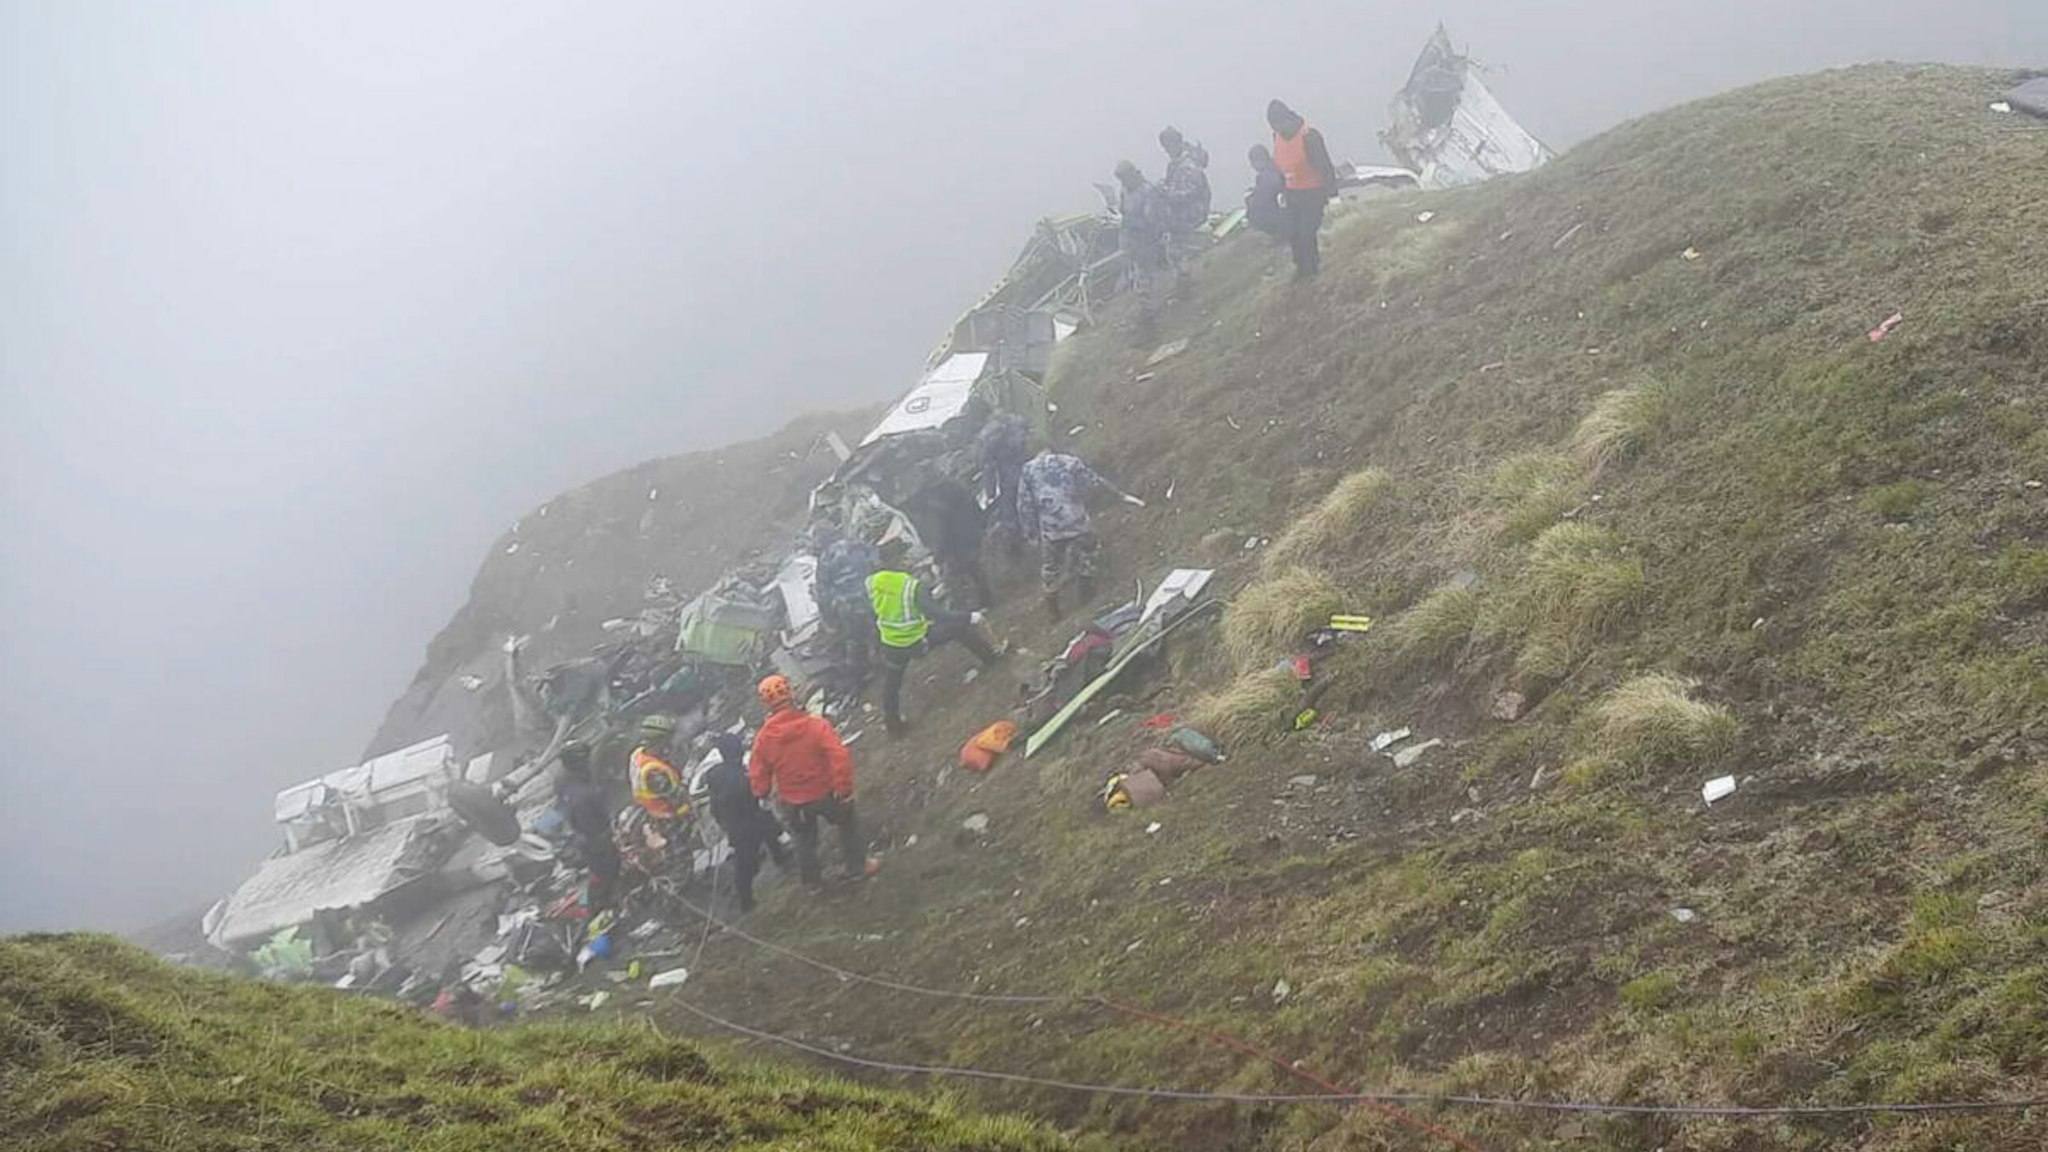 Armed Police Force, Rescue team carry the bodies of the passengers from the crash site of Tara Air at the hilly area of Thasang village of Mustang district in Nepal on May 30, 2022